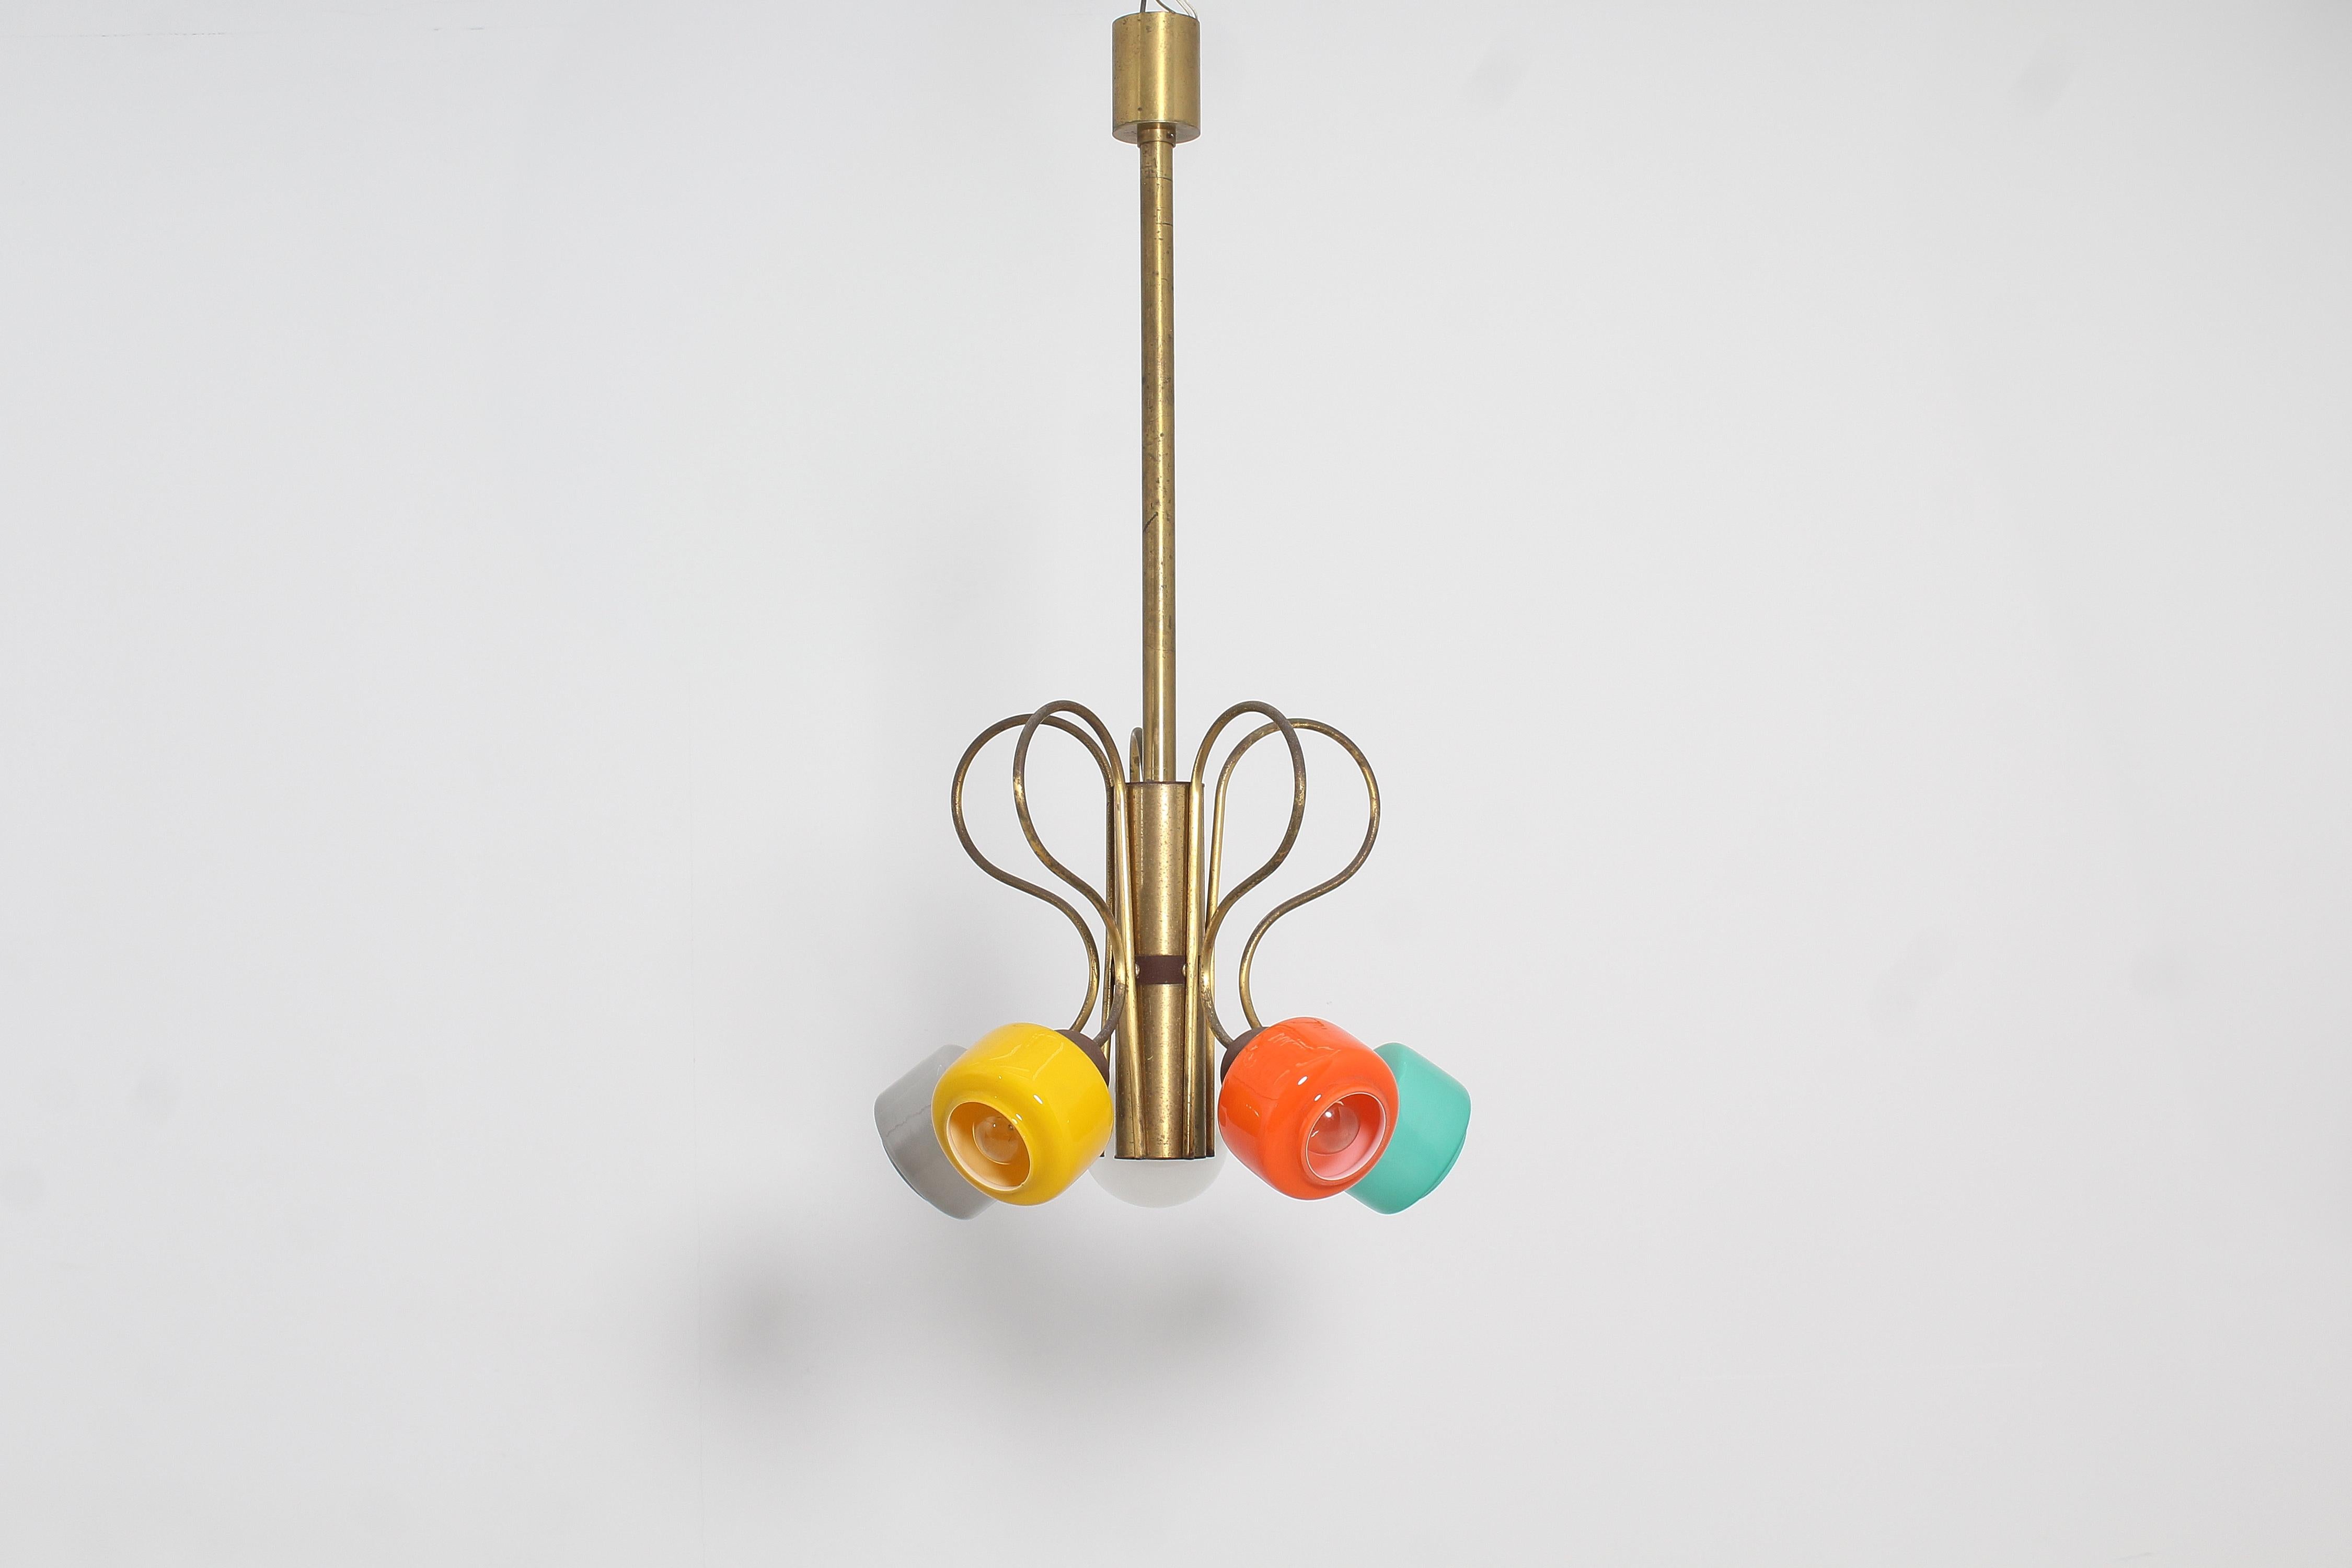 Captivating chandelier with five rigid arms in curved golden brass rod, with colored murano glass diffusers. The arms are anchored to a brass cylinder. Attributed to Stilnovo, Italy 1960s.
Wear consistent with age and use.